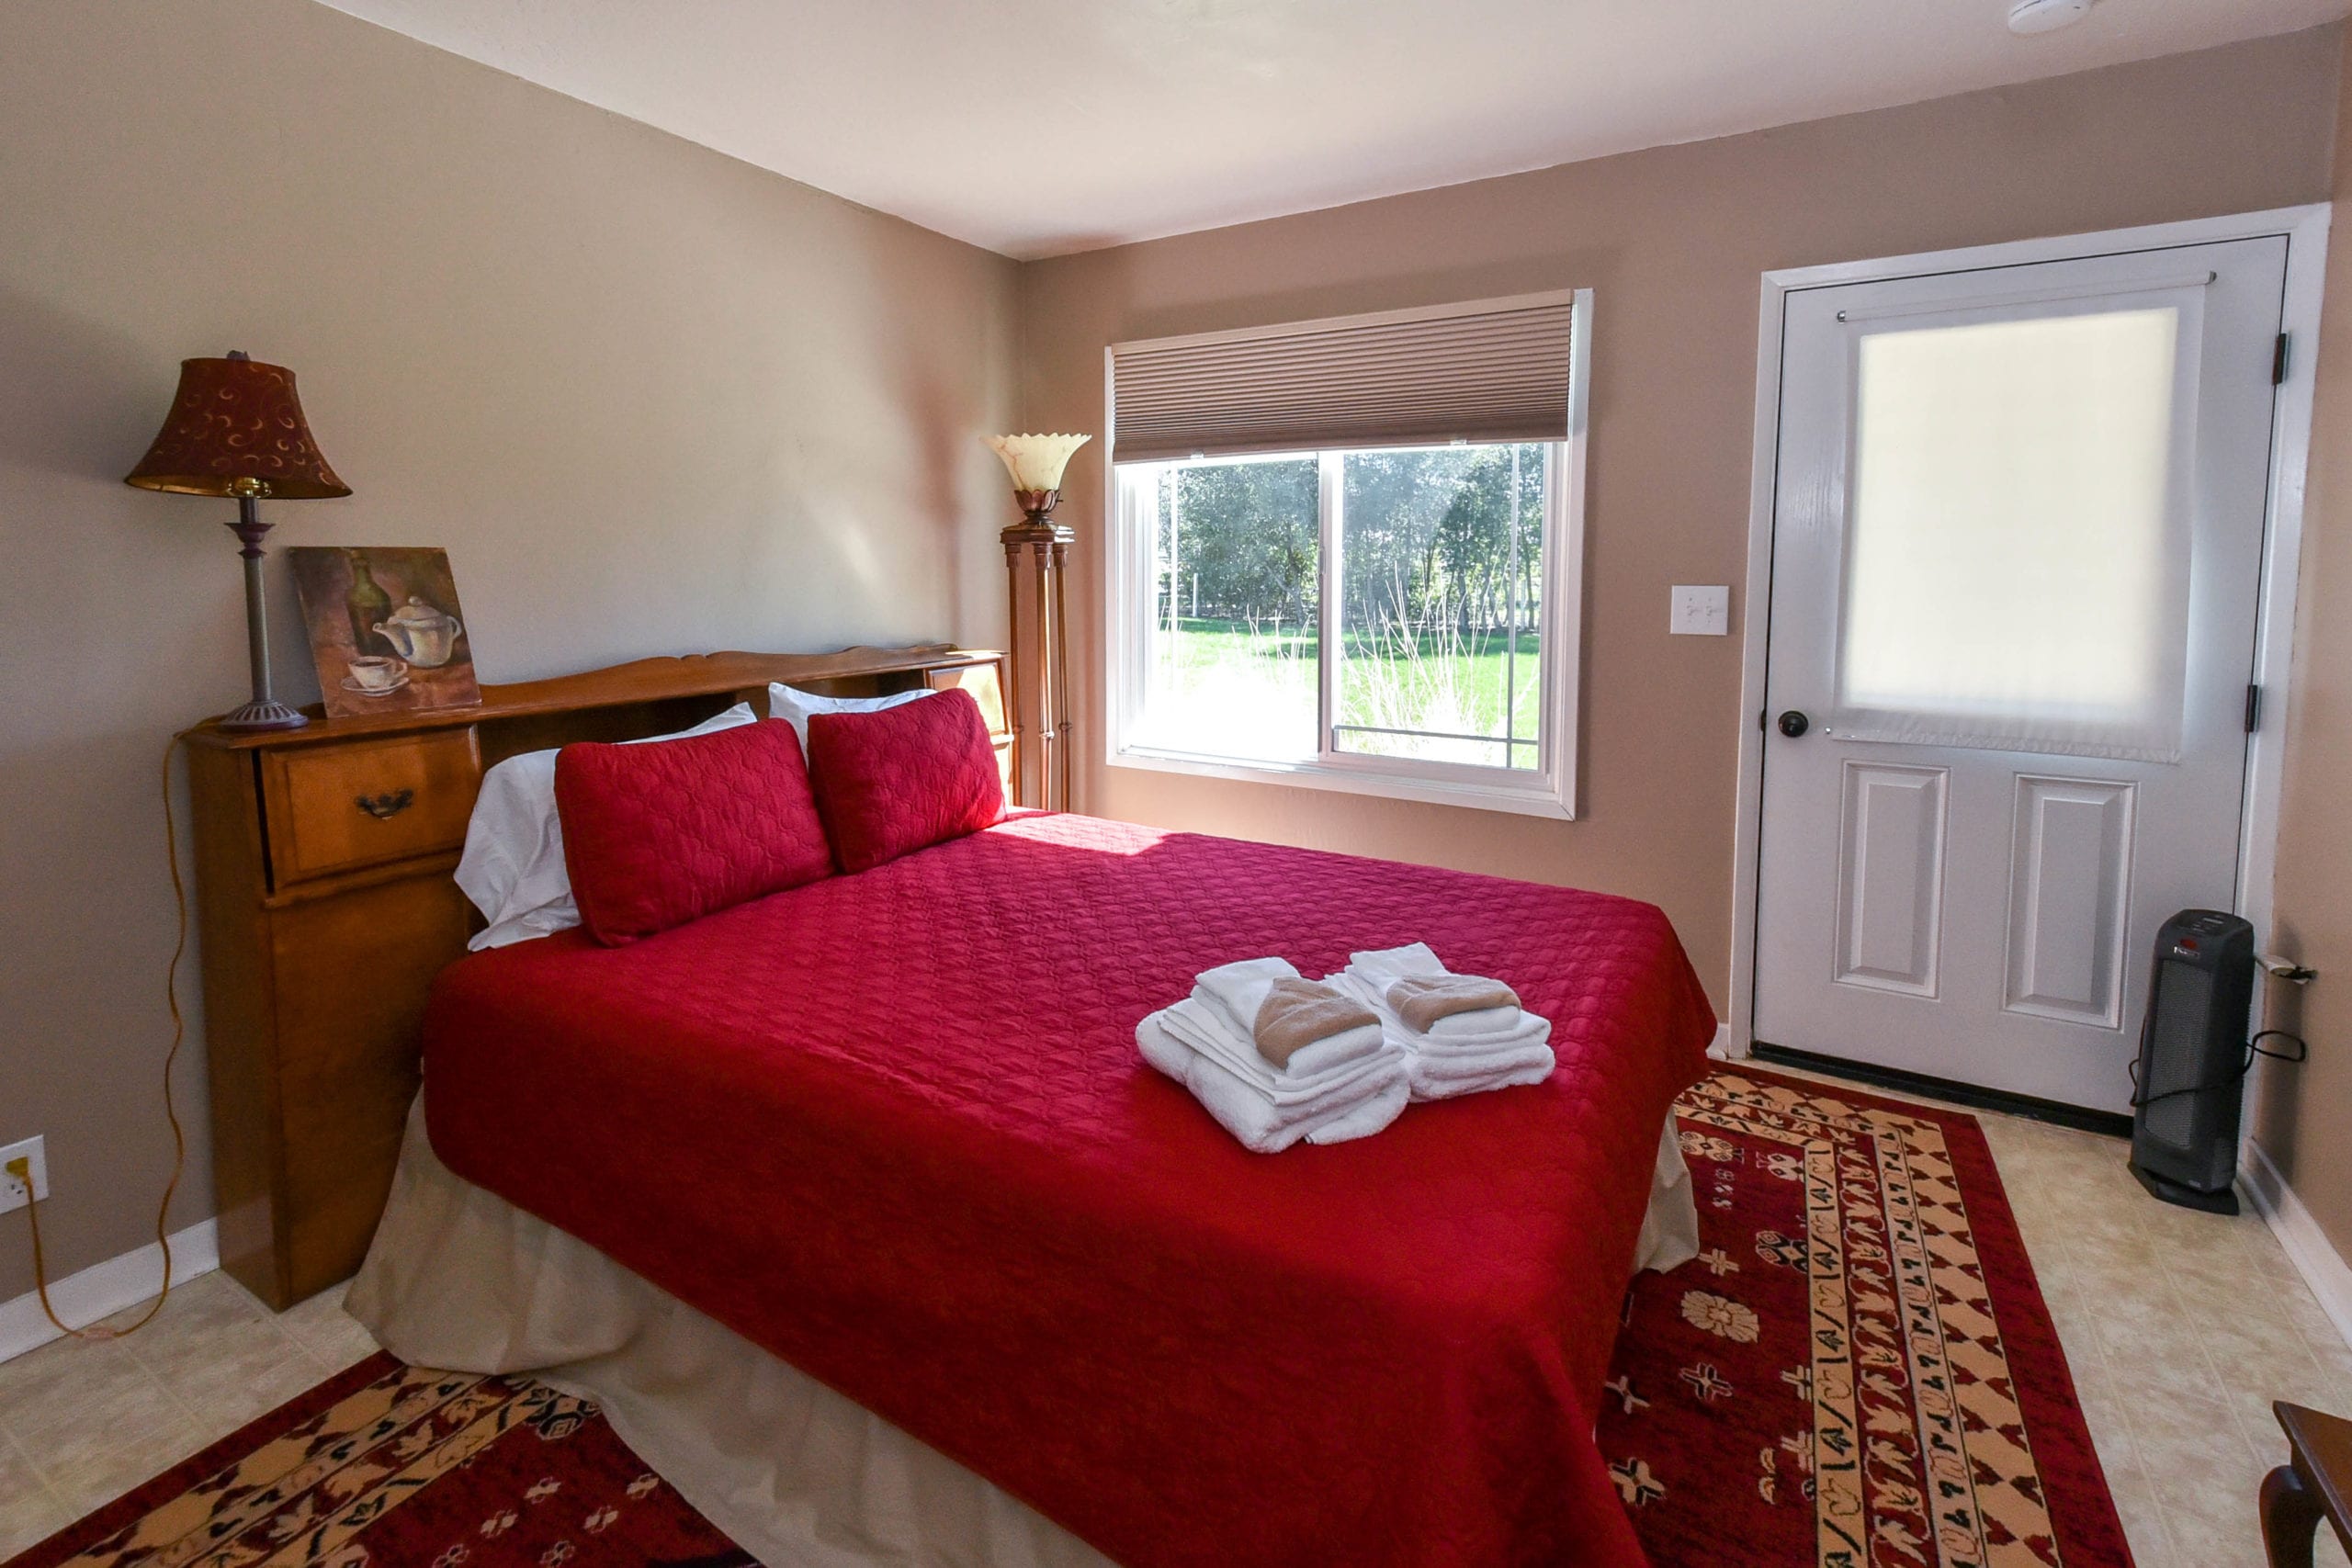 Rooms & Cottages - Paicines Ranch